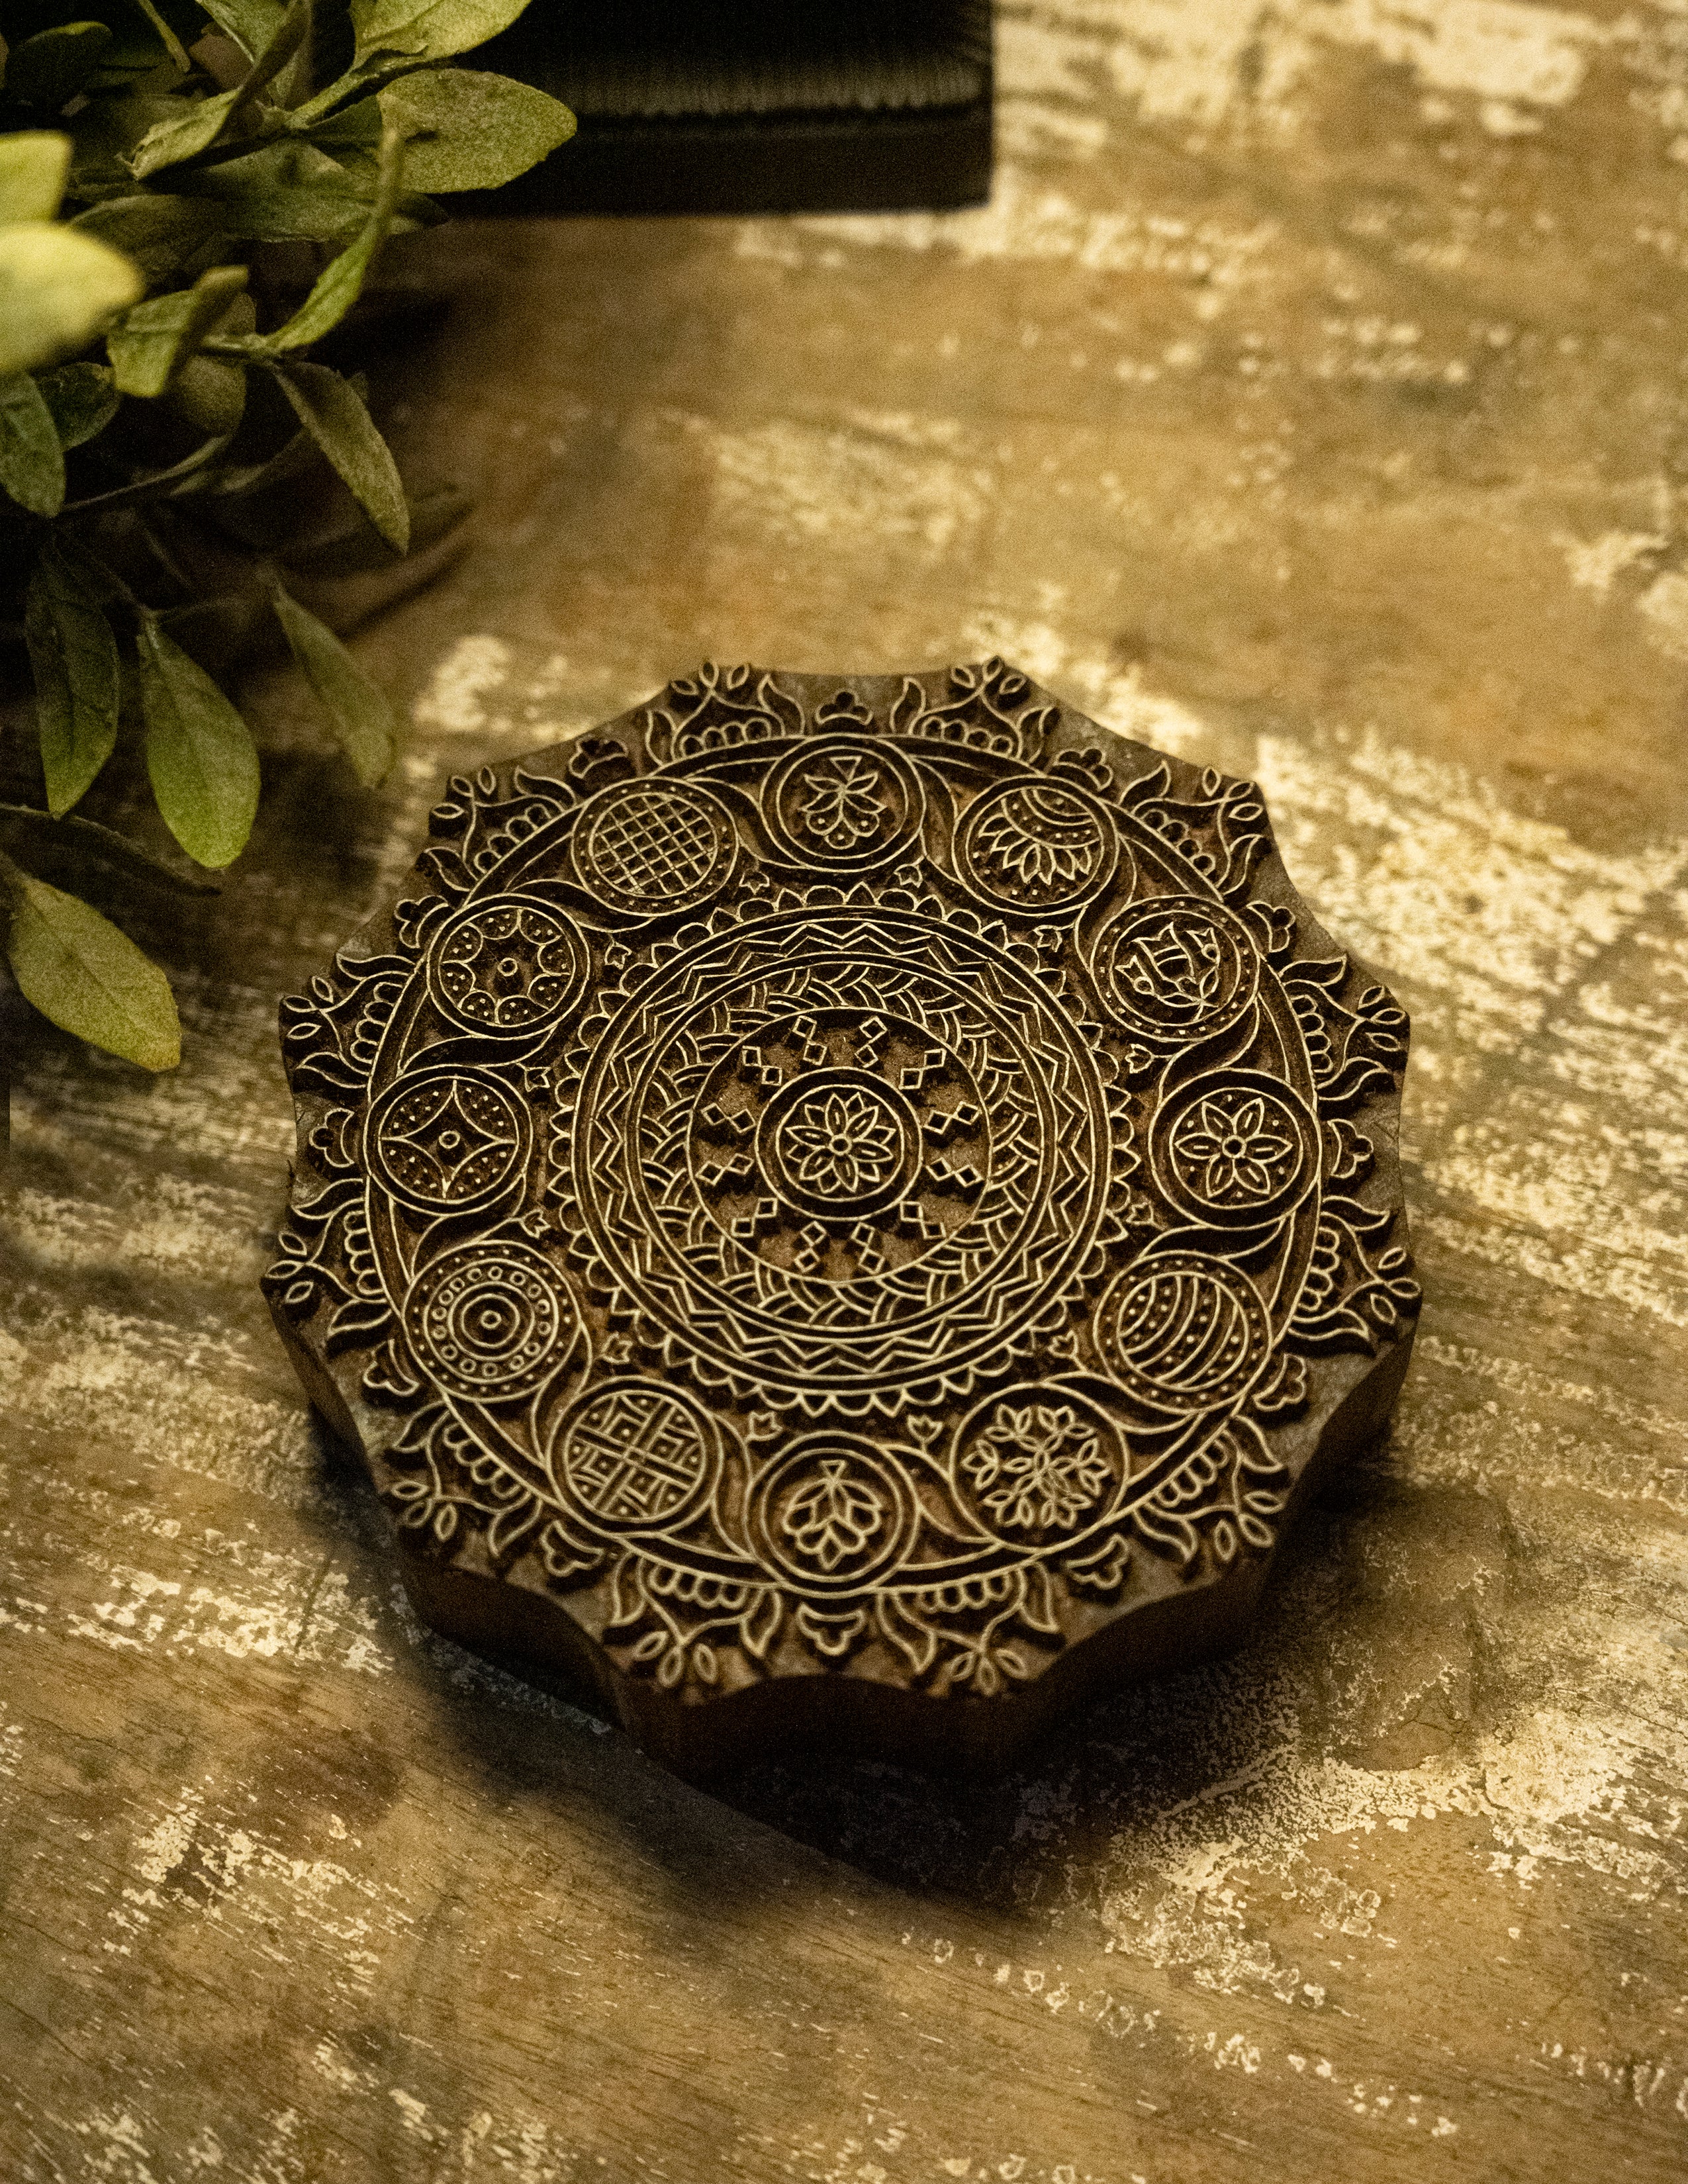 Load image into Gallery viewer, Nazakat. Exclusive, Fine Hand Engraved Wood Block Curio - Mandala